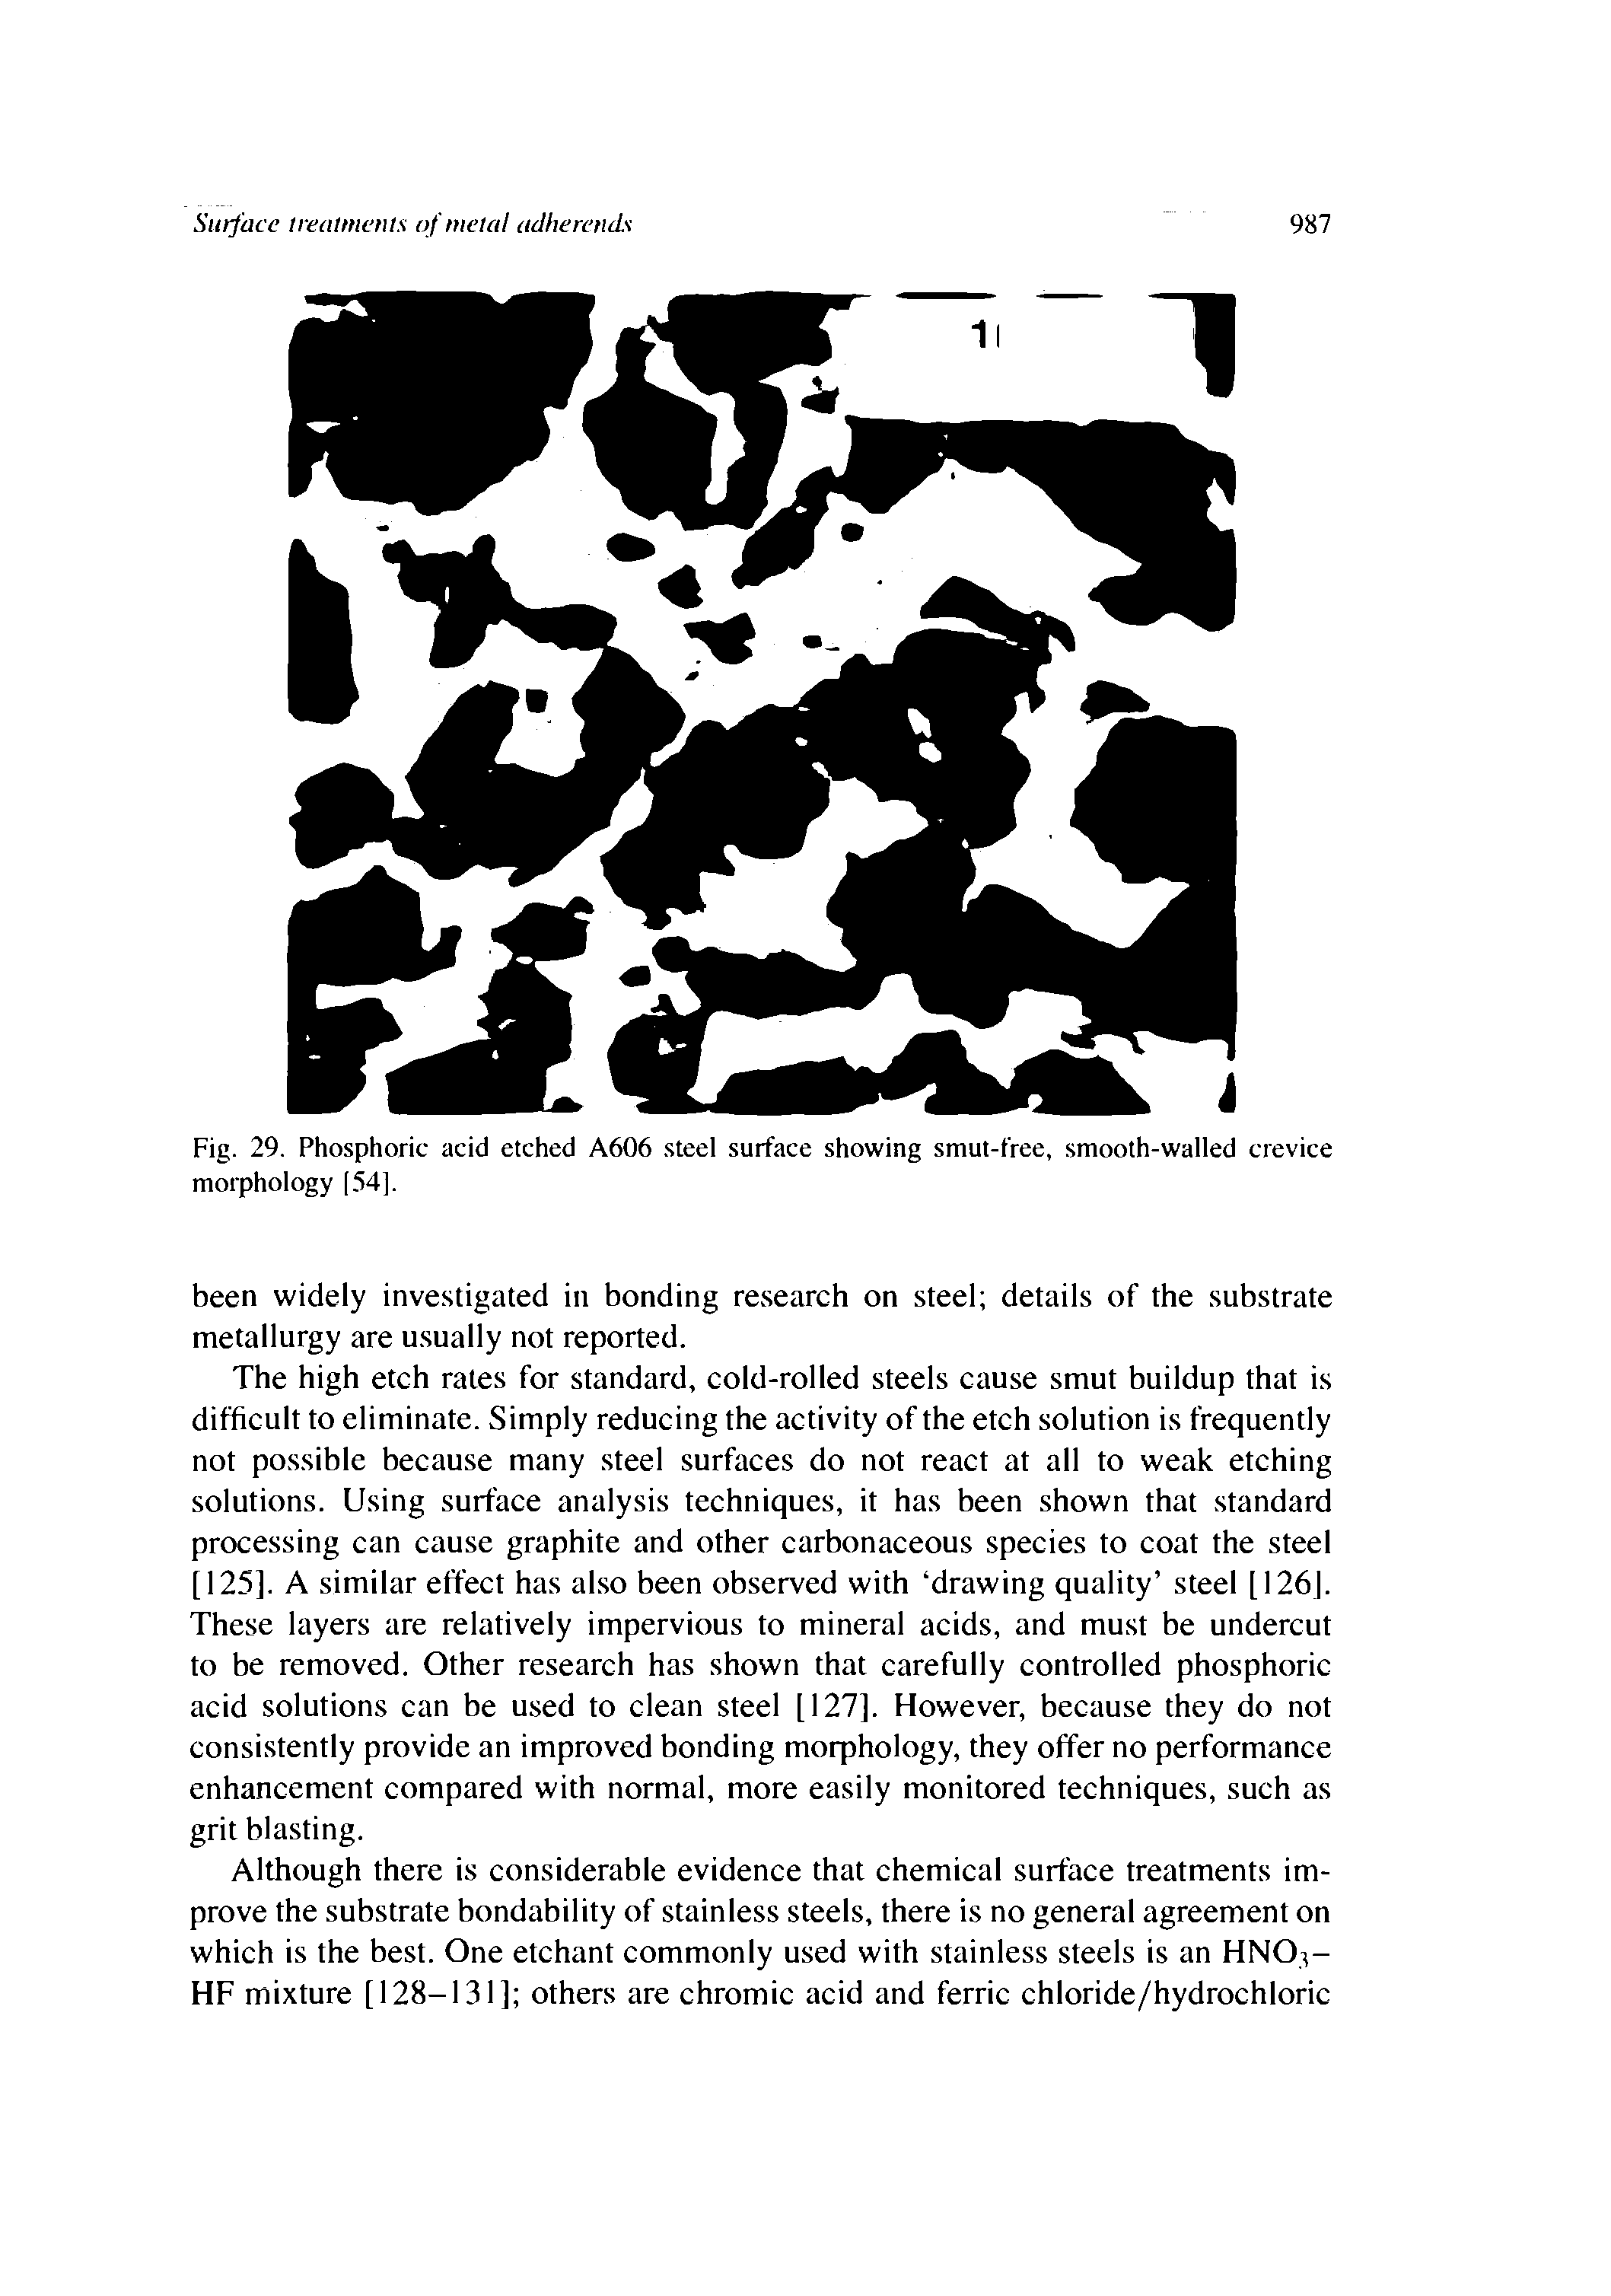 Fig. 29. Phosphoric acid etched A606. steel surface showing smut-free, smooth-walled crevice morphology [54].